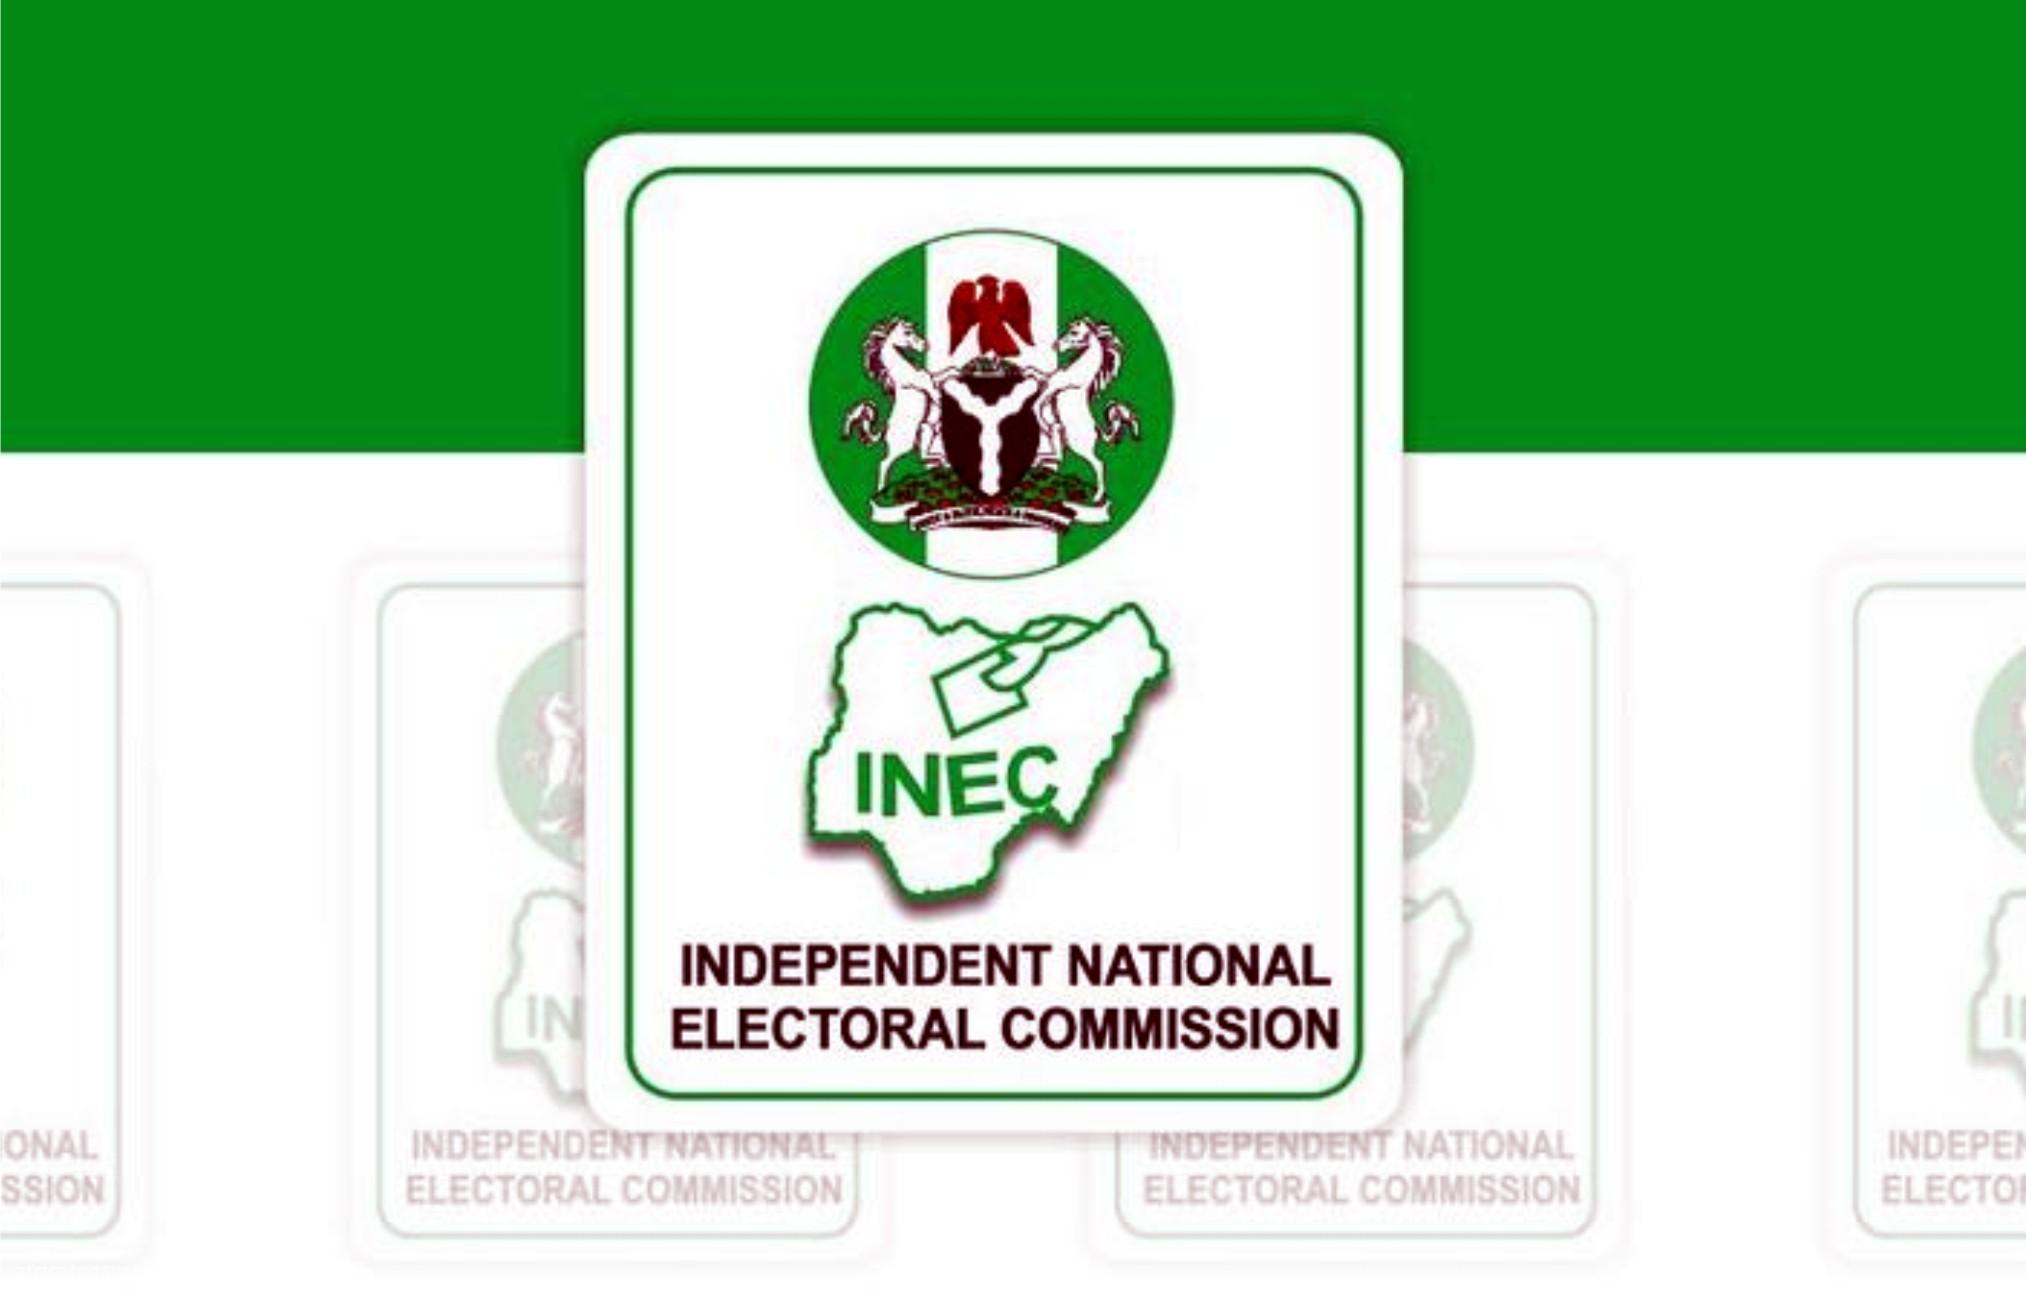 INEC Schedules Governorship Elections In Edo, Ondo State